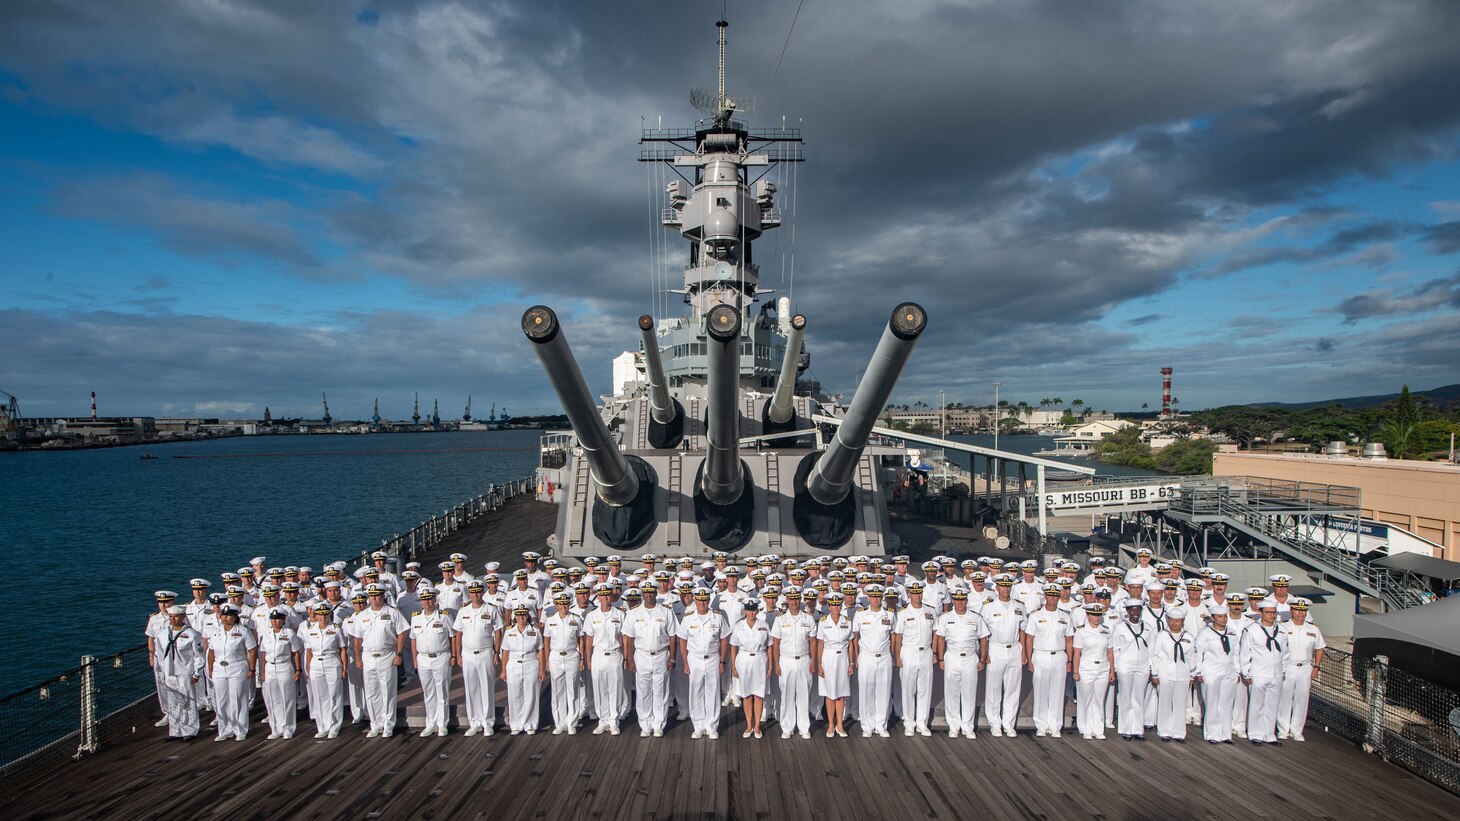 PEARL HARBOR, Hawaii (July 21, 2022) –U.S. Navy reserve Sailors pose for a group photo during Rim of the Pacific (RIMPAC) 2022, July 21. Twenty-six nations, 38 ships, three submarines, more than 170 aircraft and 25,000 personnel are participating in RIMPAC from June 29 to Aug. 4 in and around the Hawaiian Islands and Southern California. The world's largest international maritime exercise, RIMPAC provides a unique training opportunity while fostering and sustaining cooperative relationships among participants critical to ensuring the safety of sea lanes and security on the world's oceans. RIMPAC 2022 is the 28th exercise in the series that began in 1971. (U.S. Navy video by Mass Communications Specialist 3rd Class Dylan Lavin)